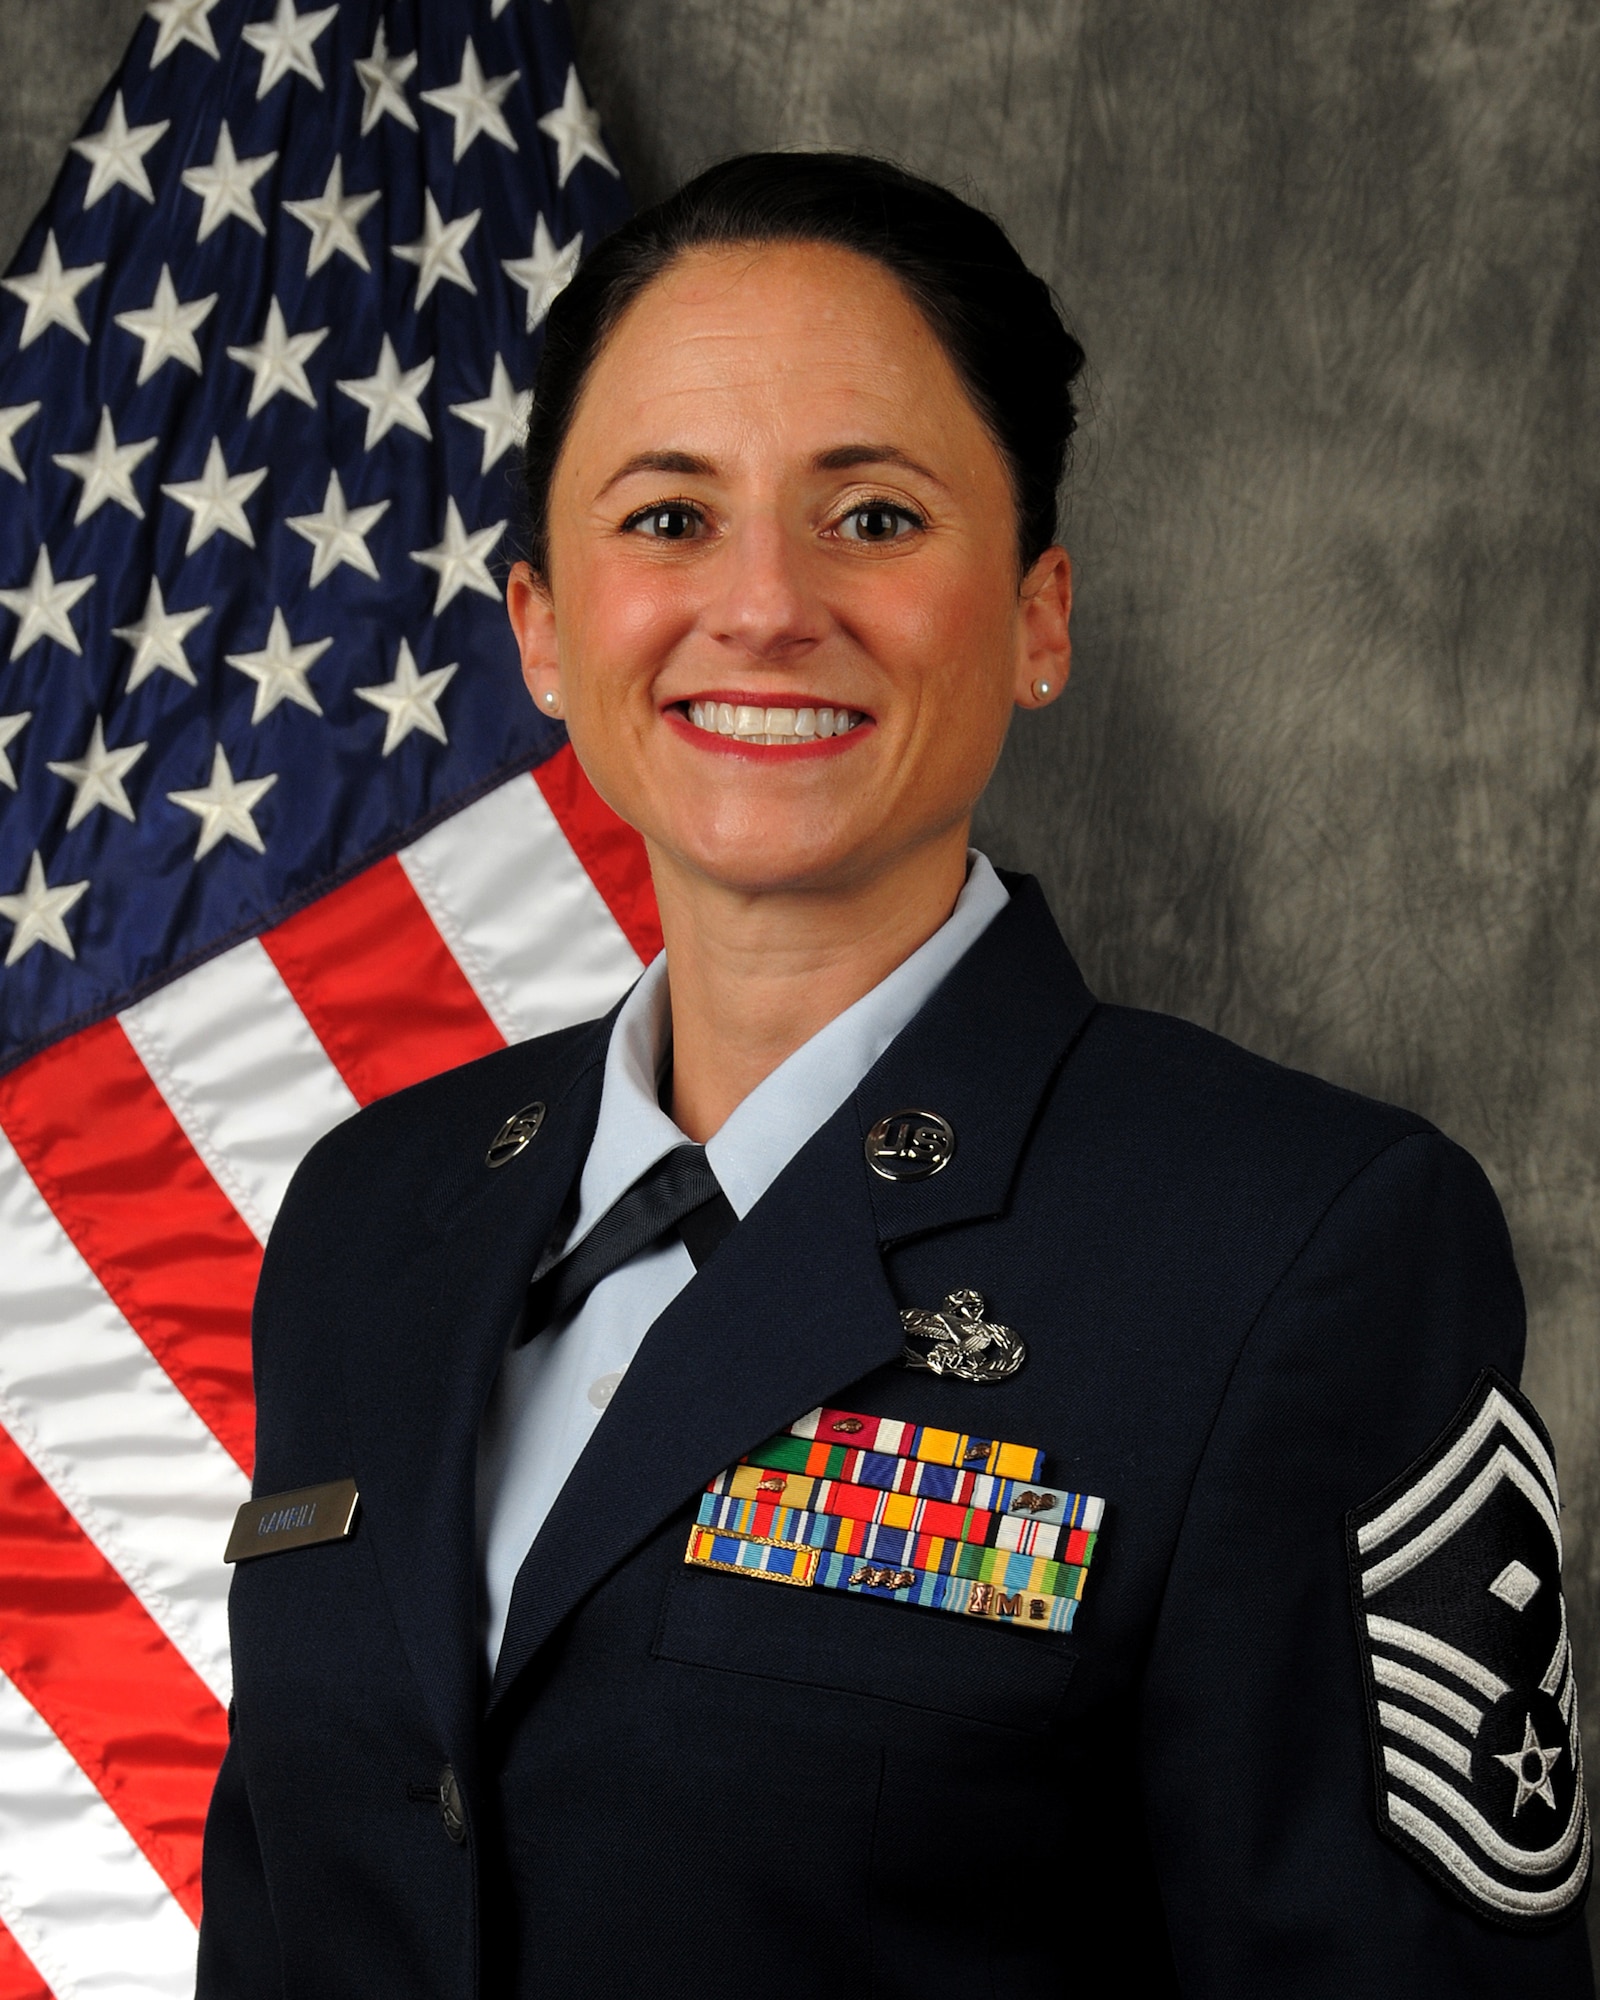 Senior Master Sgt. Rhonda Gambill, 87th Aerial Port Squadron first sergeant, was selected as the 2018 Air Force Reserve Command First Sergeant of the Year. The announcement was made March 27, 2019.